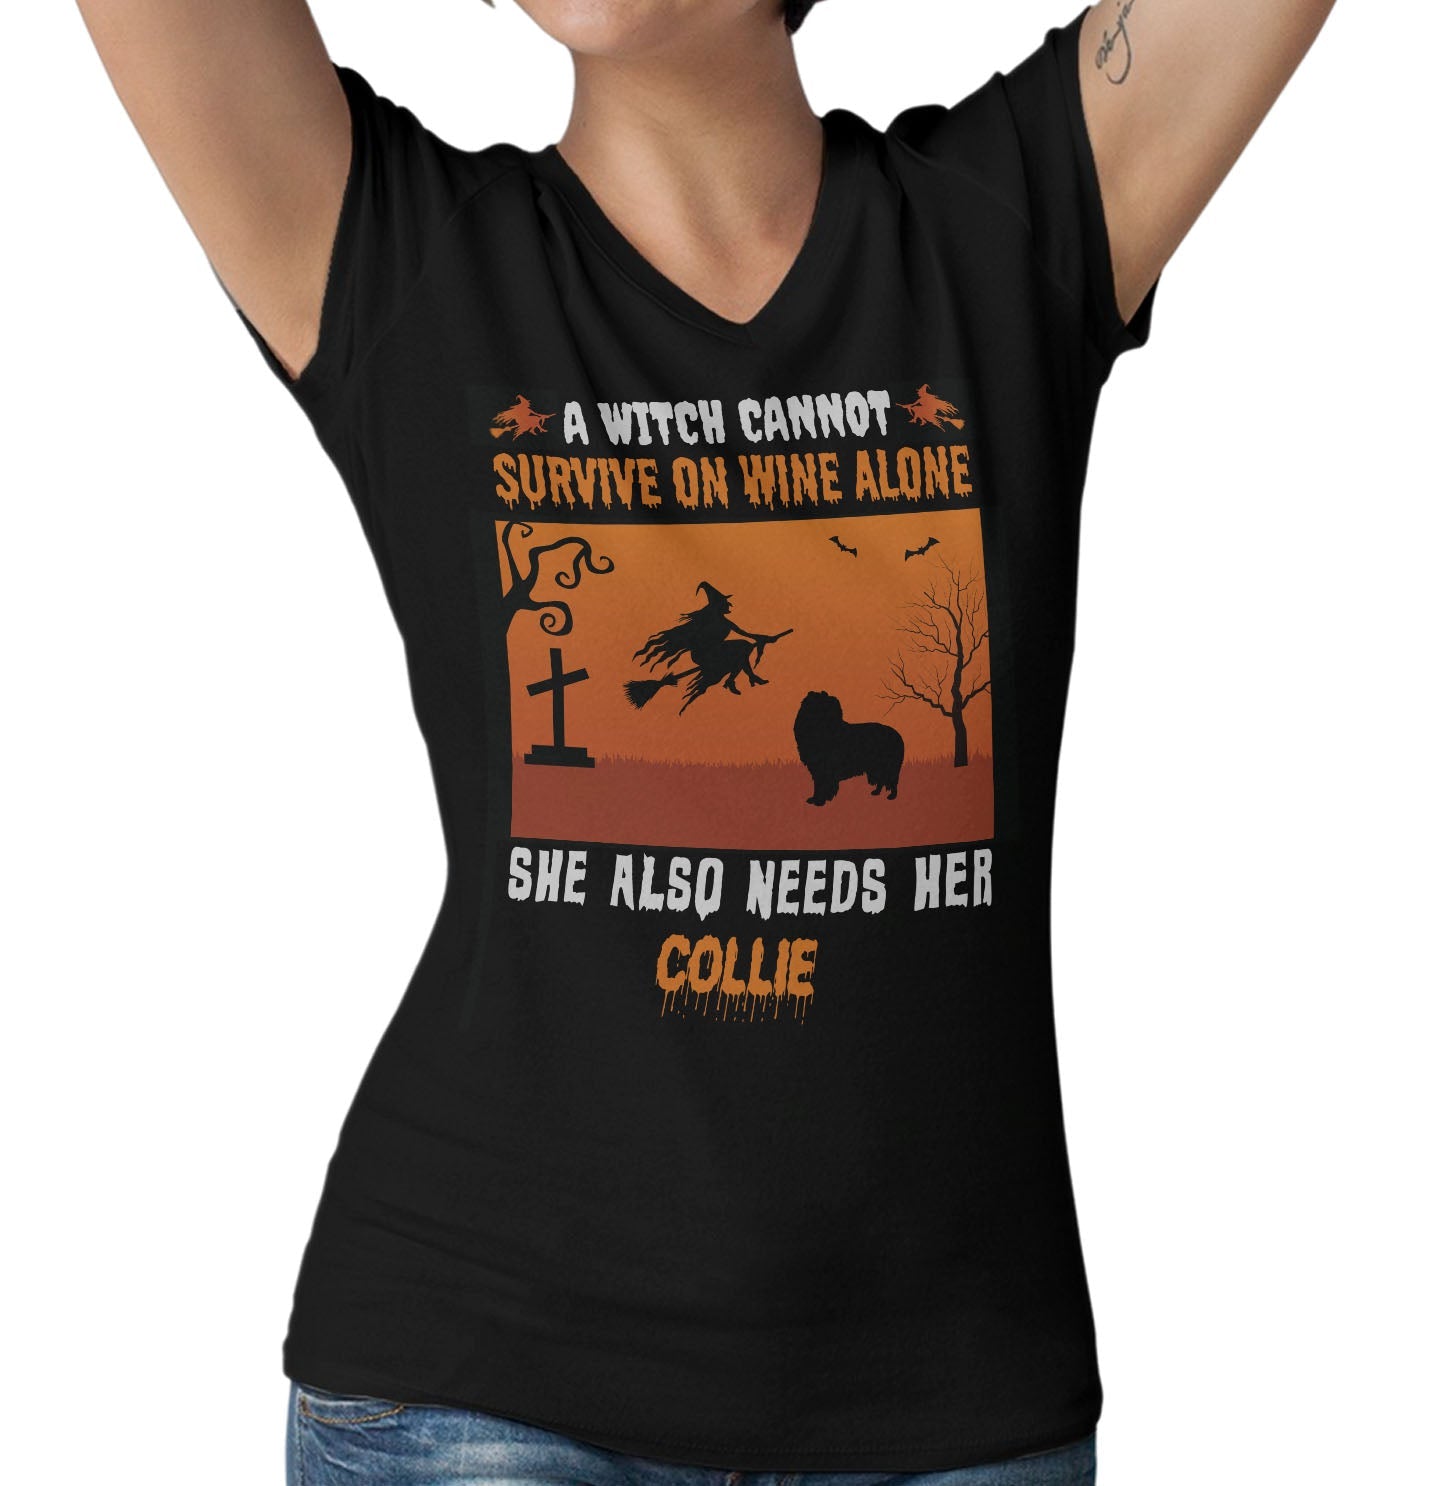 A Witch Needs Her Collie (Rough) - Women's V-Neck T-Shirt